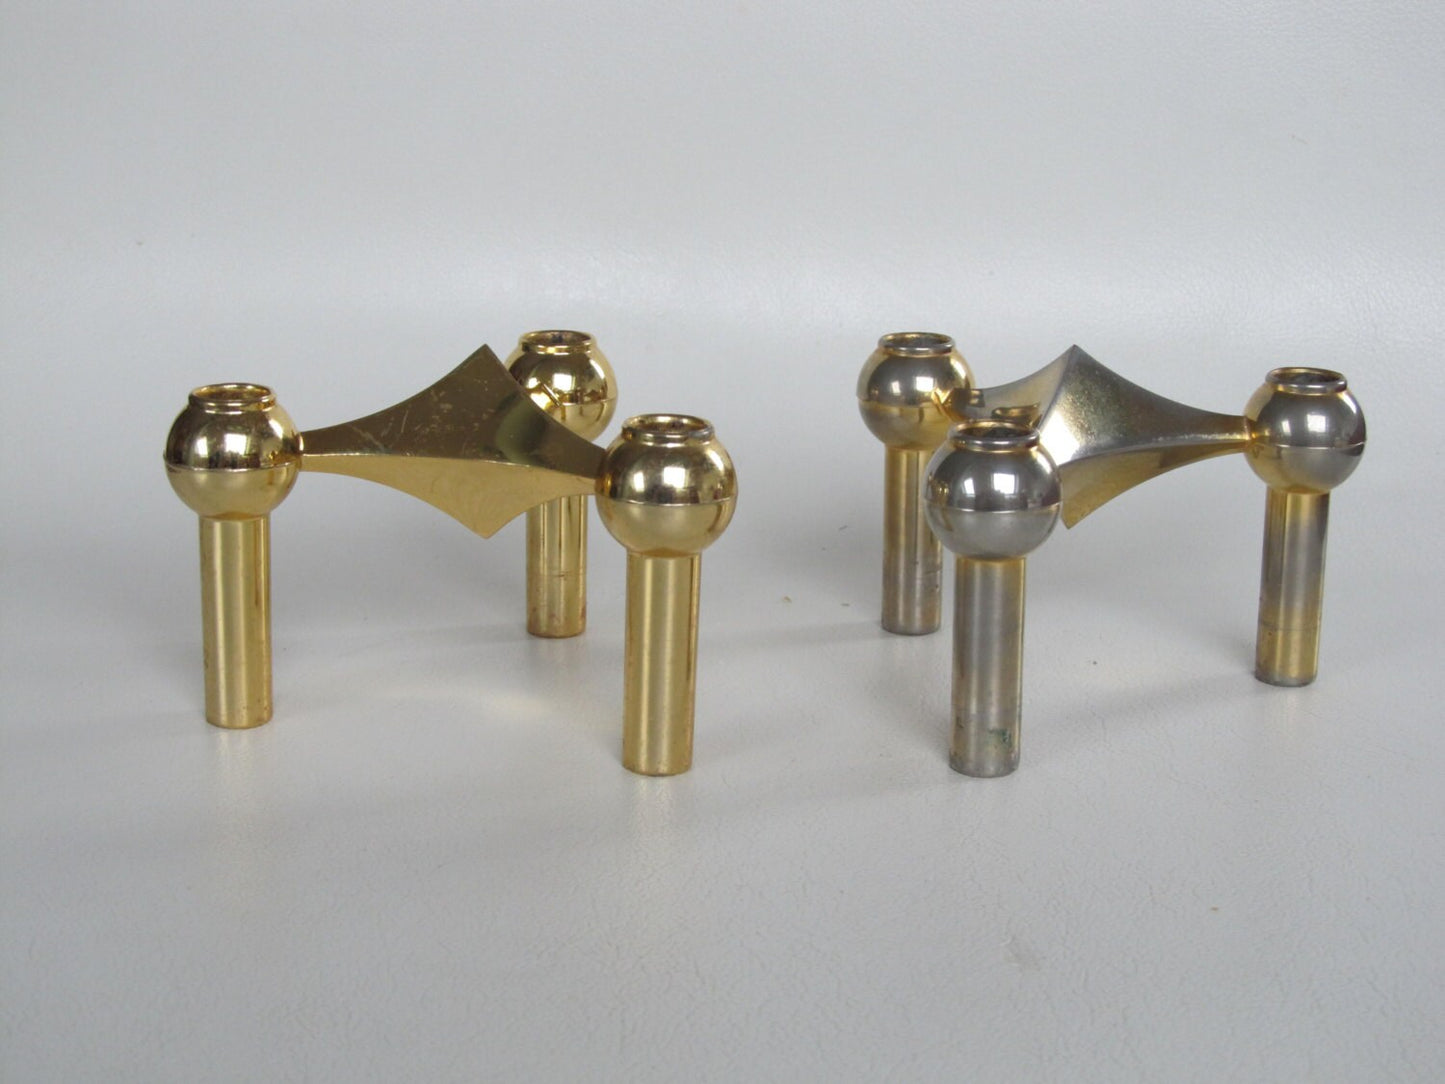 Brass/Gold Candleholders Ceasar Stoffi and Fritz Nagel and manufactured by BMF (Bayerische Metallwaren Fabrik) in the 60's